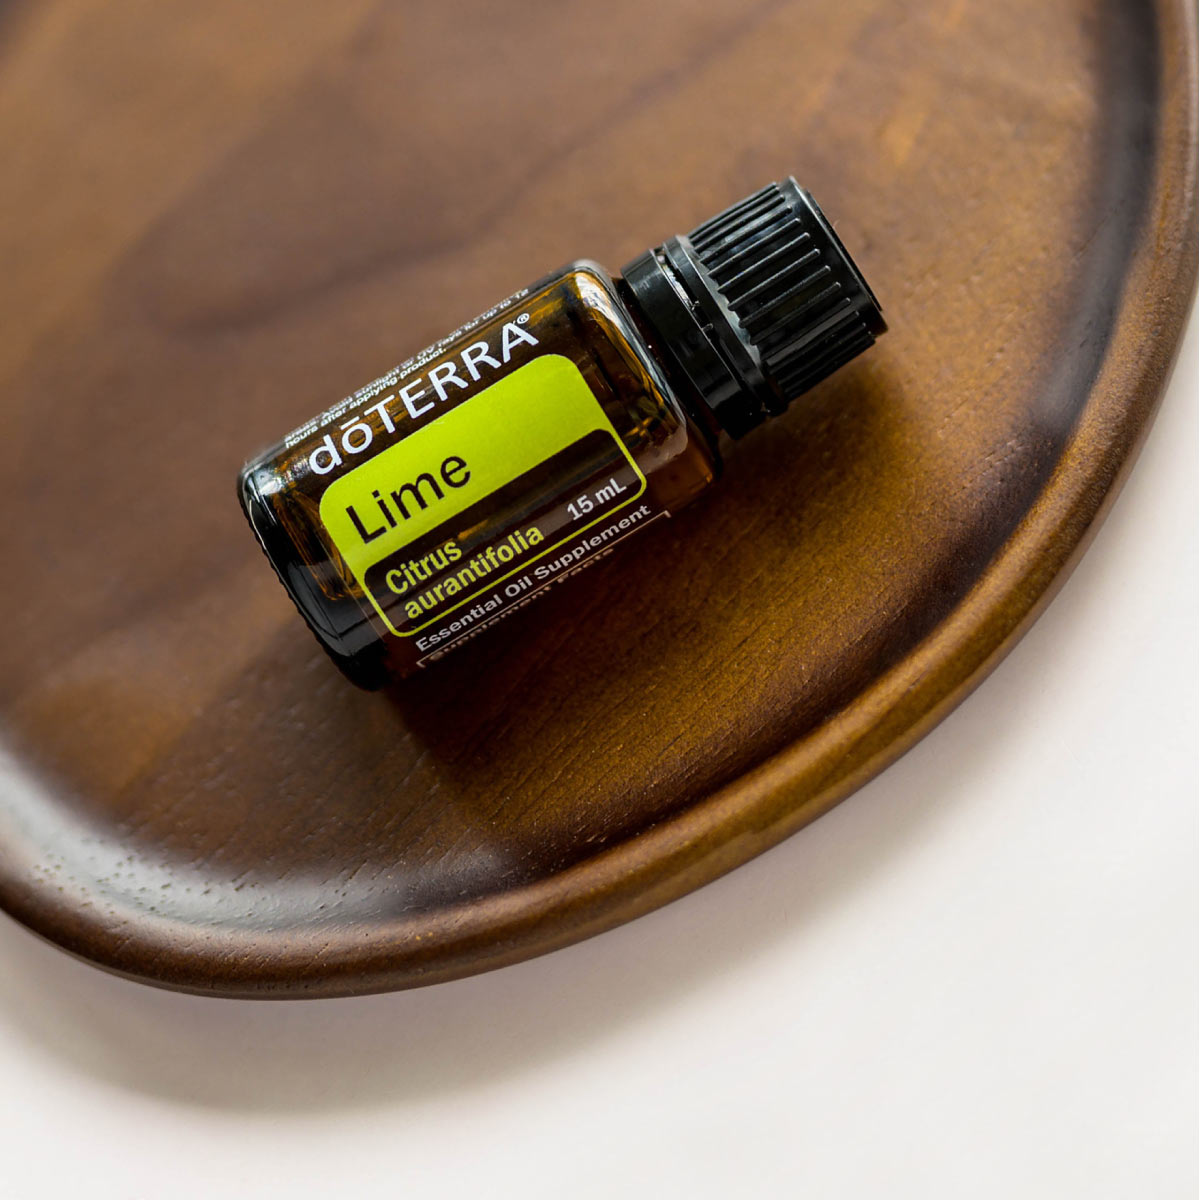 Lime essential oil bottle resting on a wooden dish. What are the top uses for Lime oil? Lime essential oil is commonly used for cooking, cleaning skincare, to promote an uplifting mood, and internal benefits.